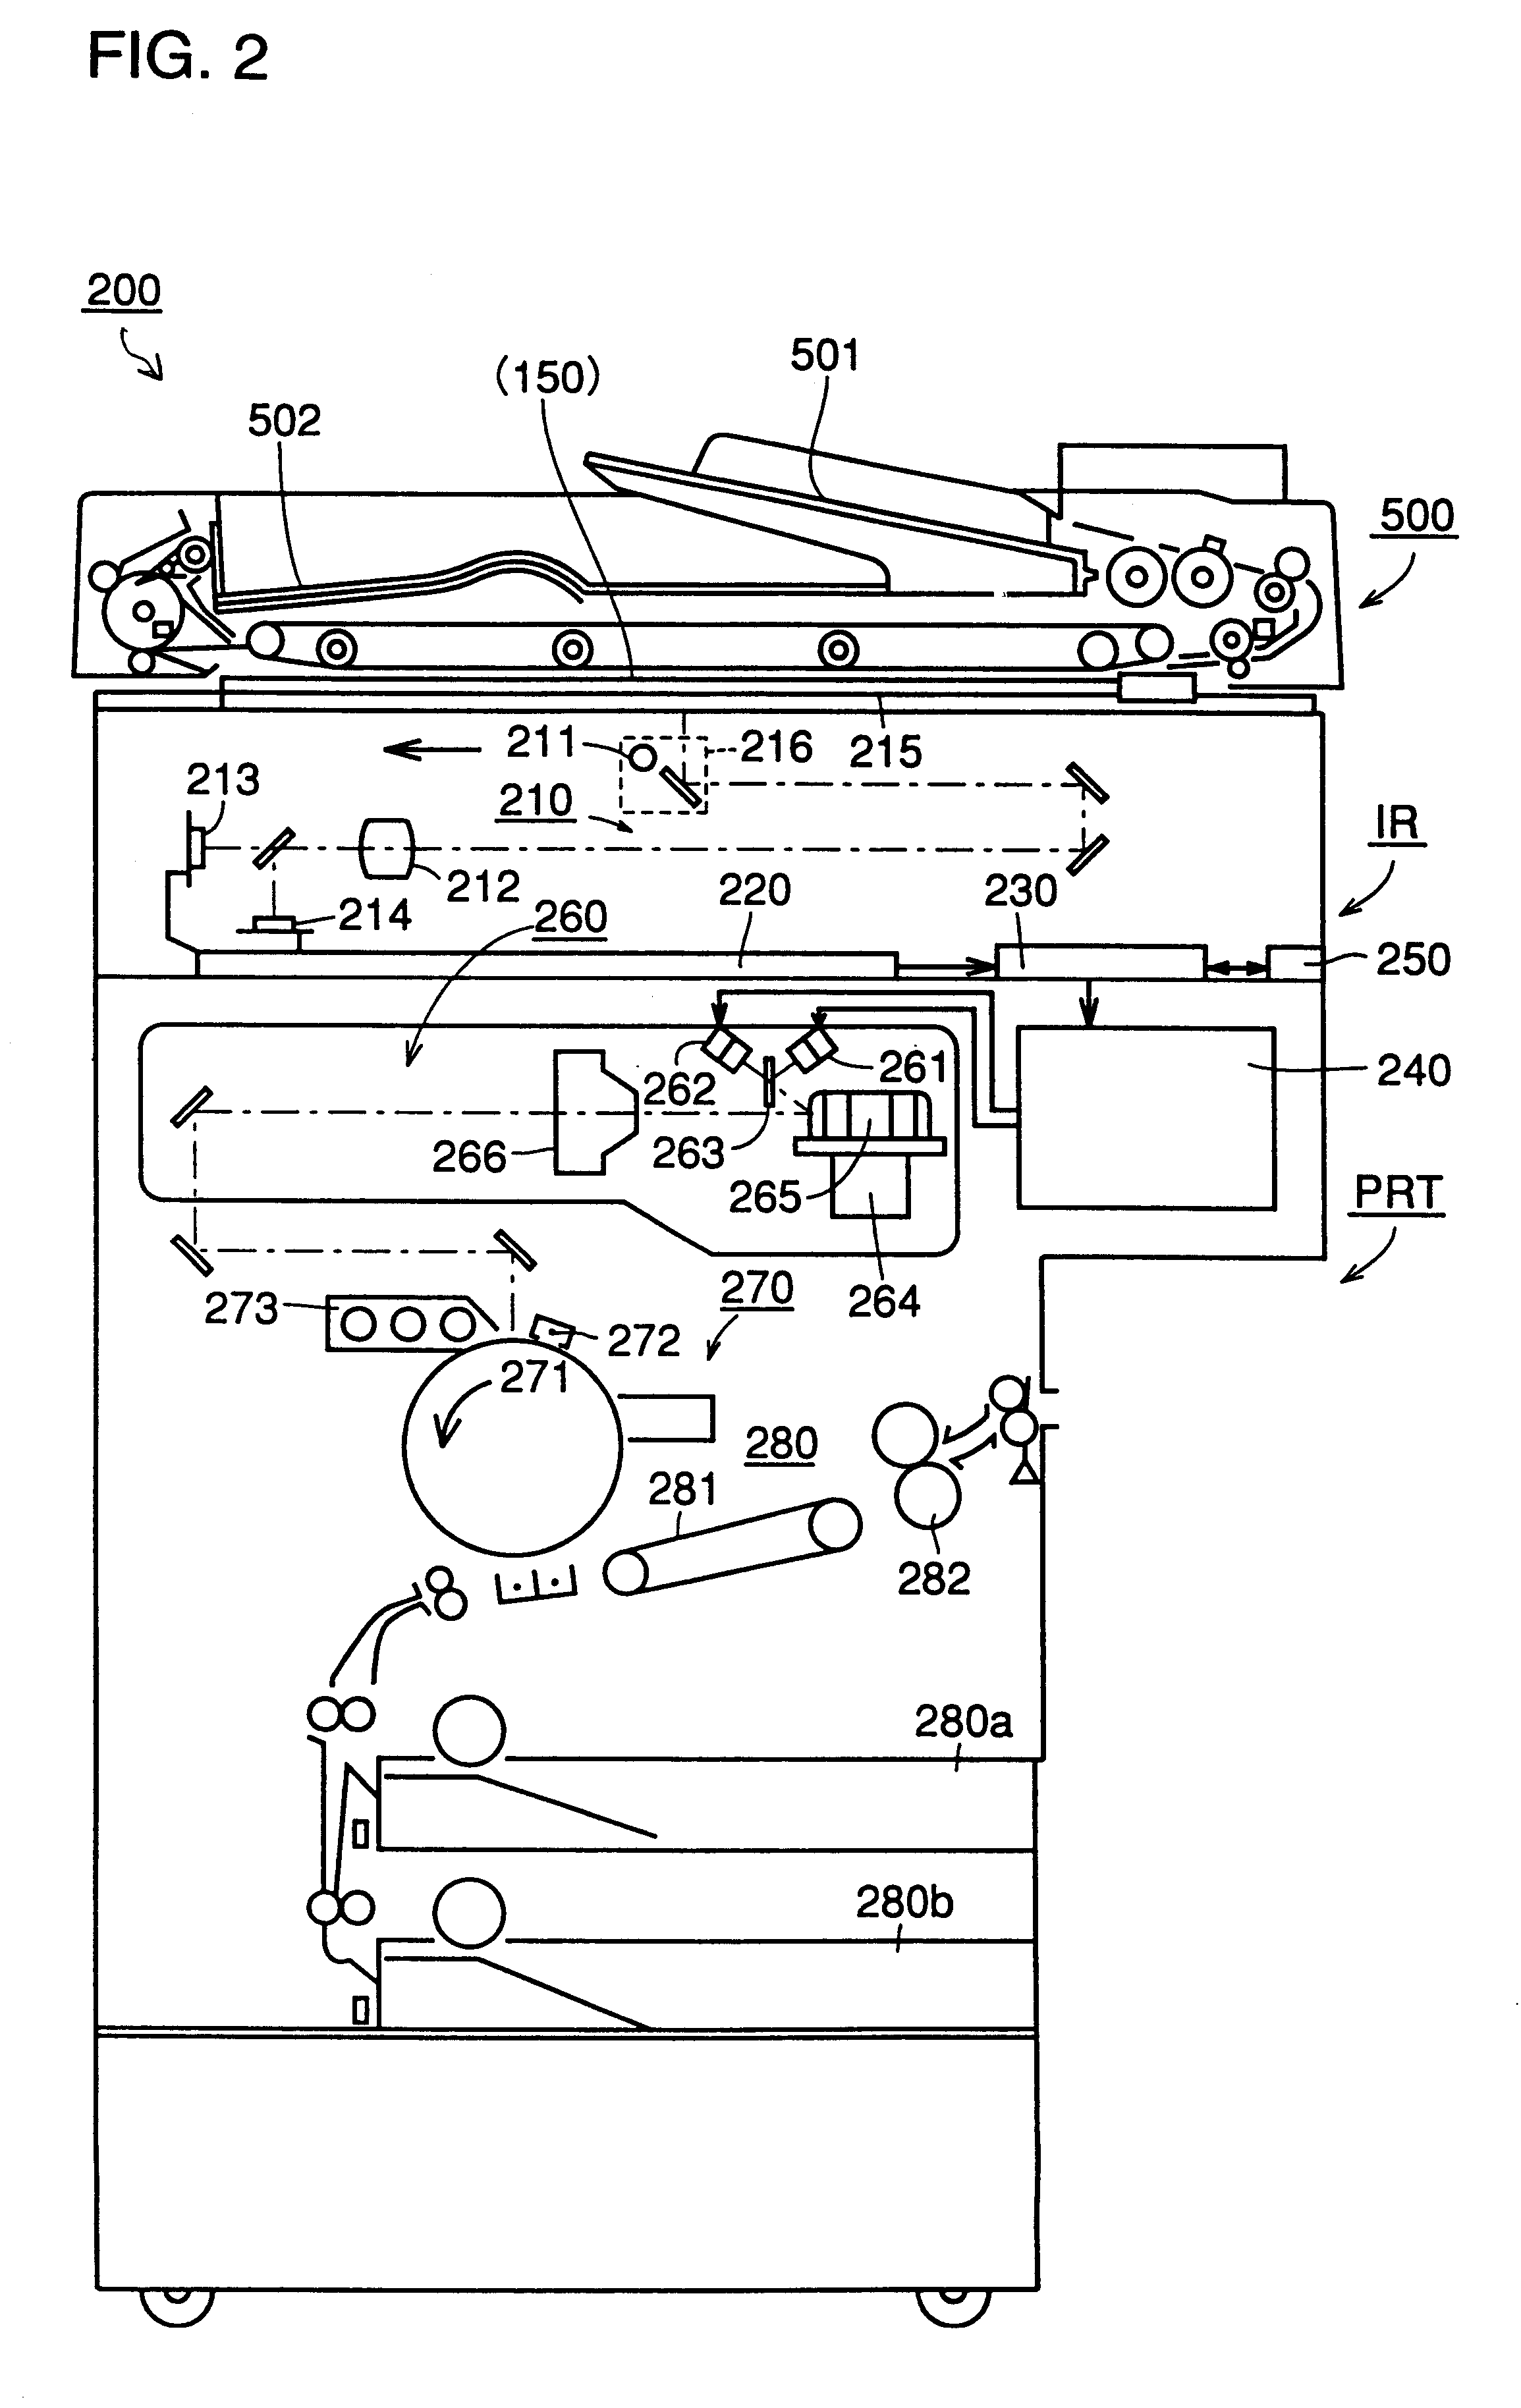 Image forming apparatus with highly operable sheet discharge device